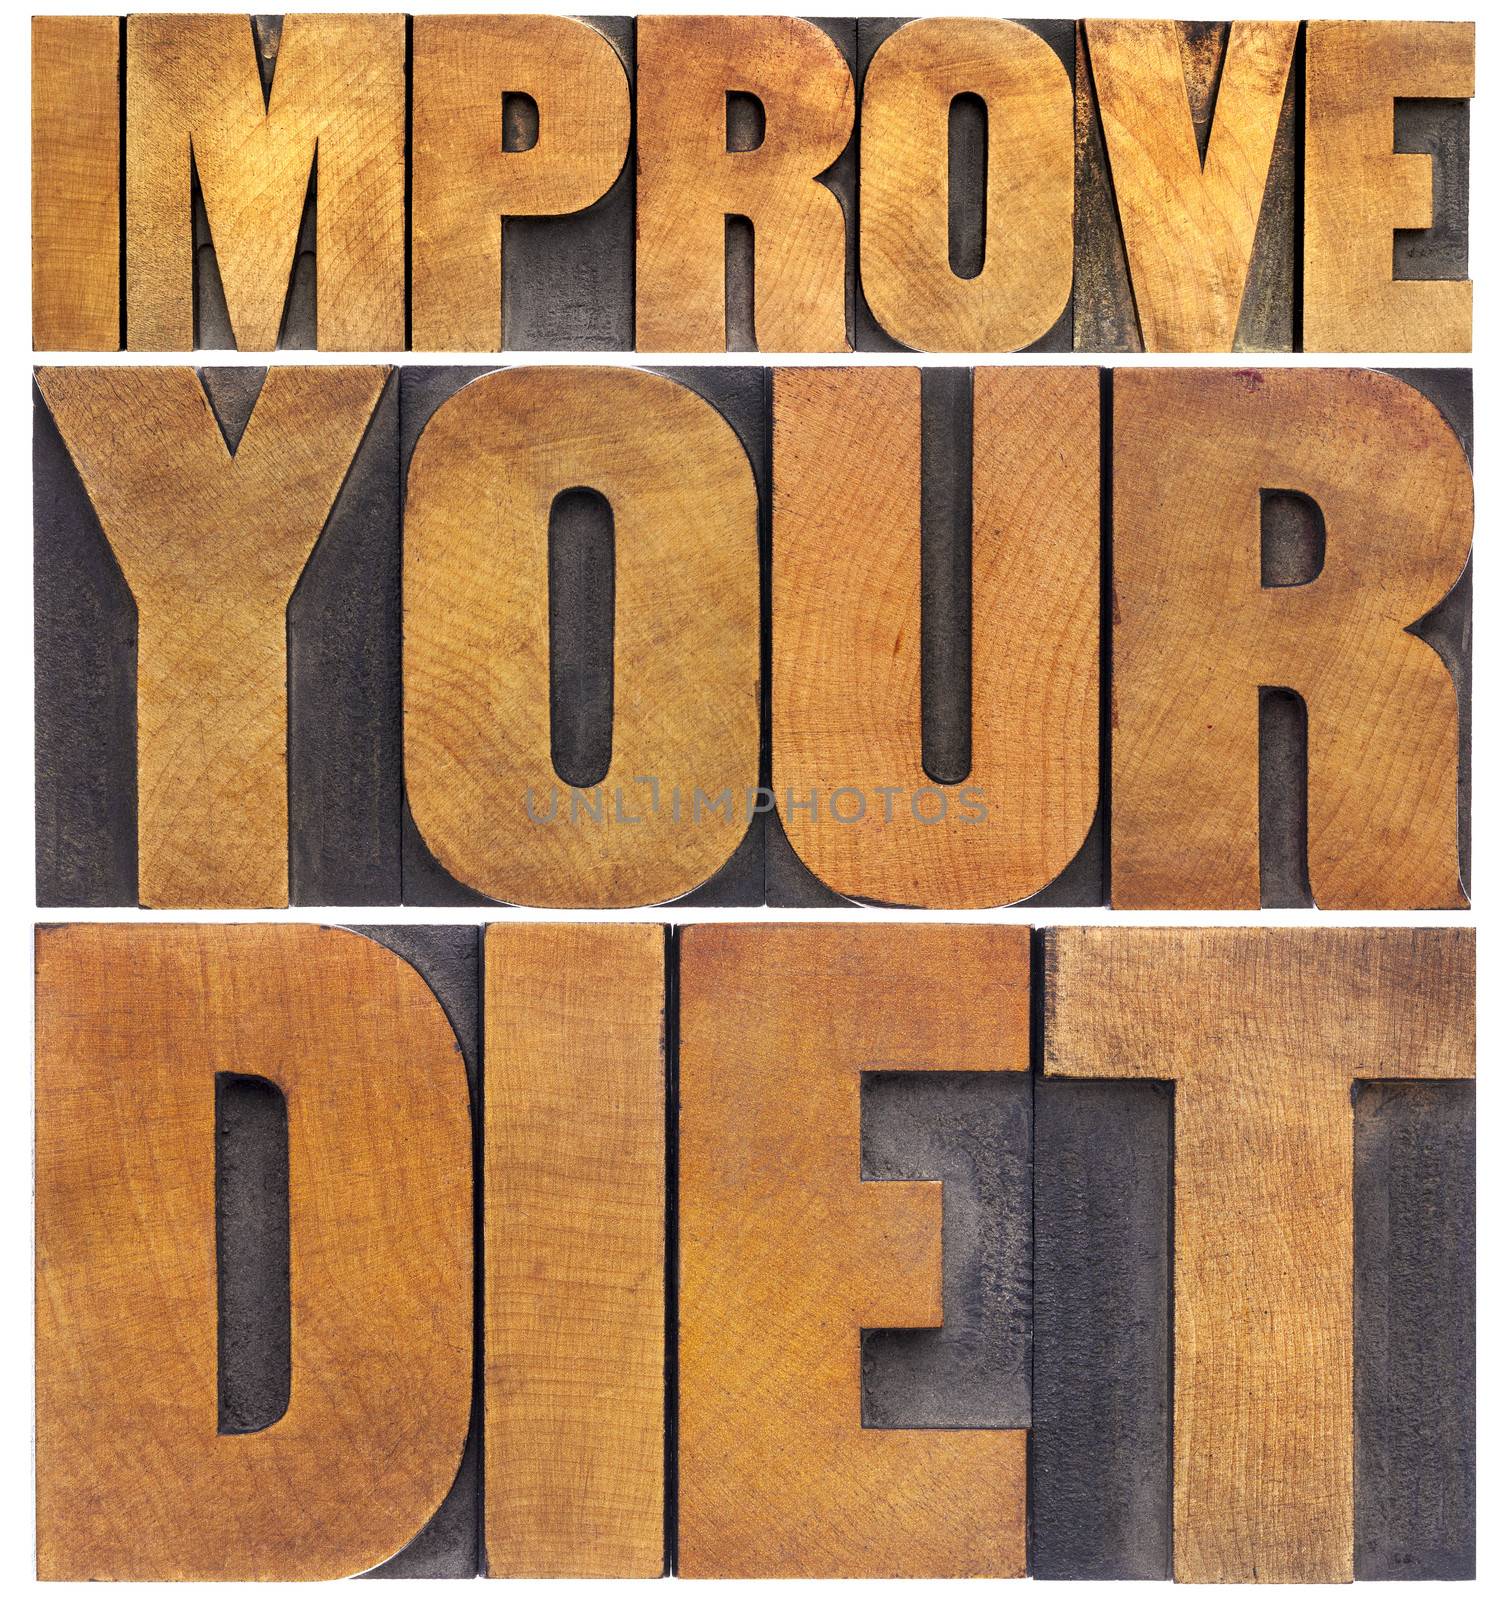 improve your diet - healthy lifestyle concept - isolated text in vintage letterpress wood type